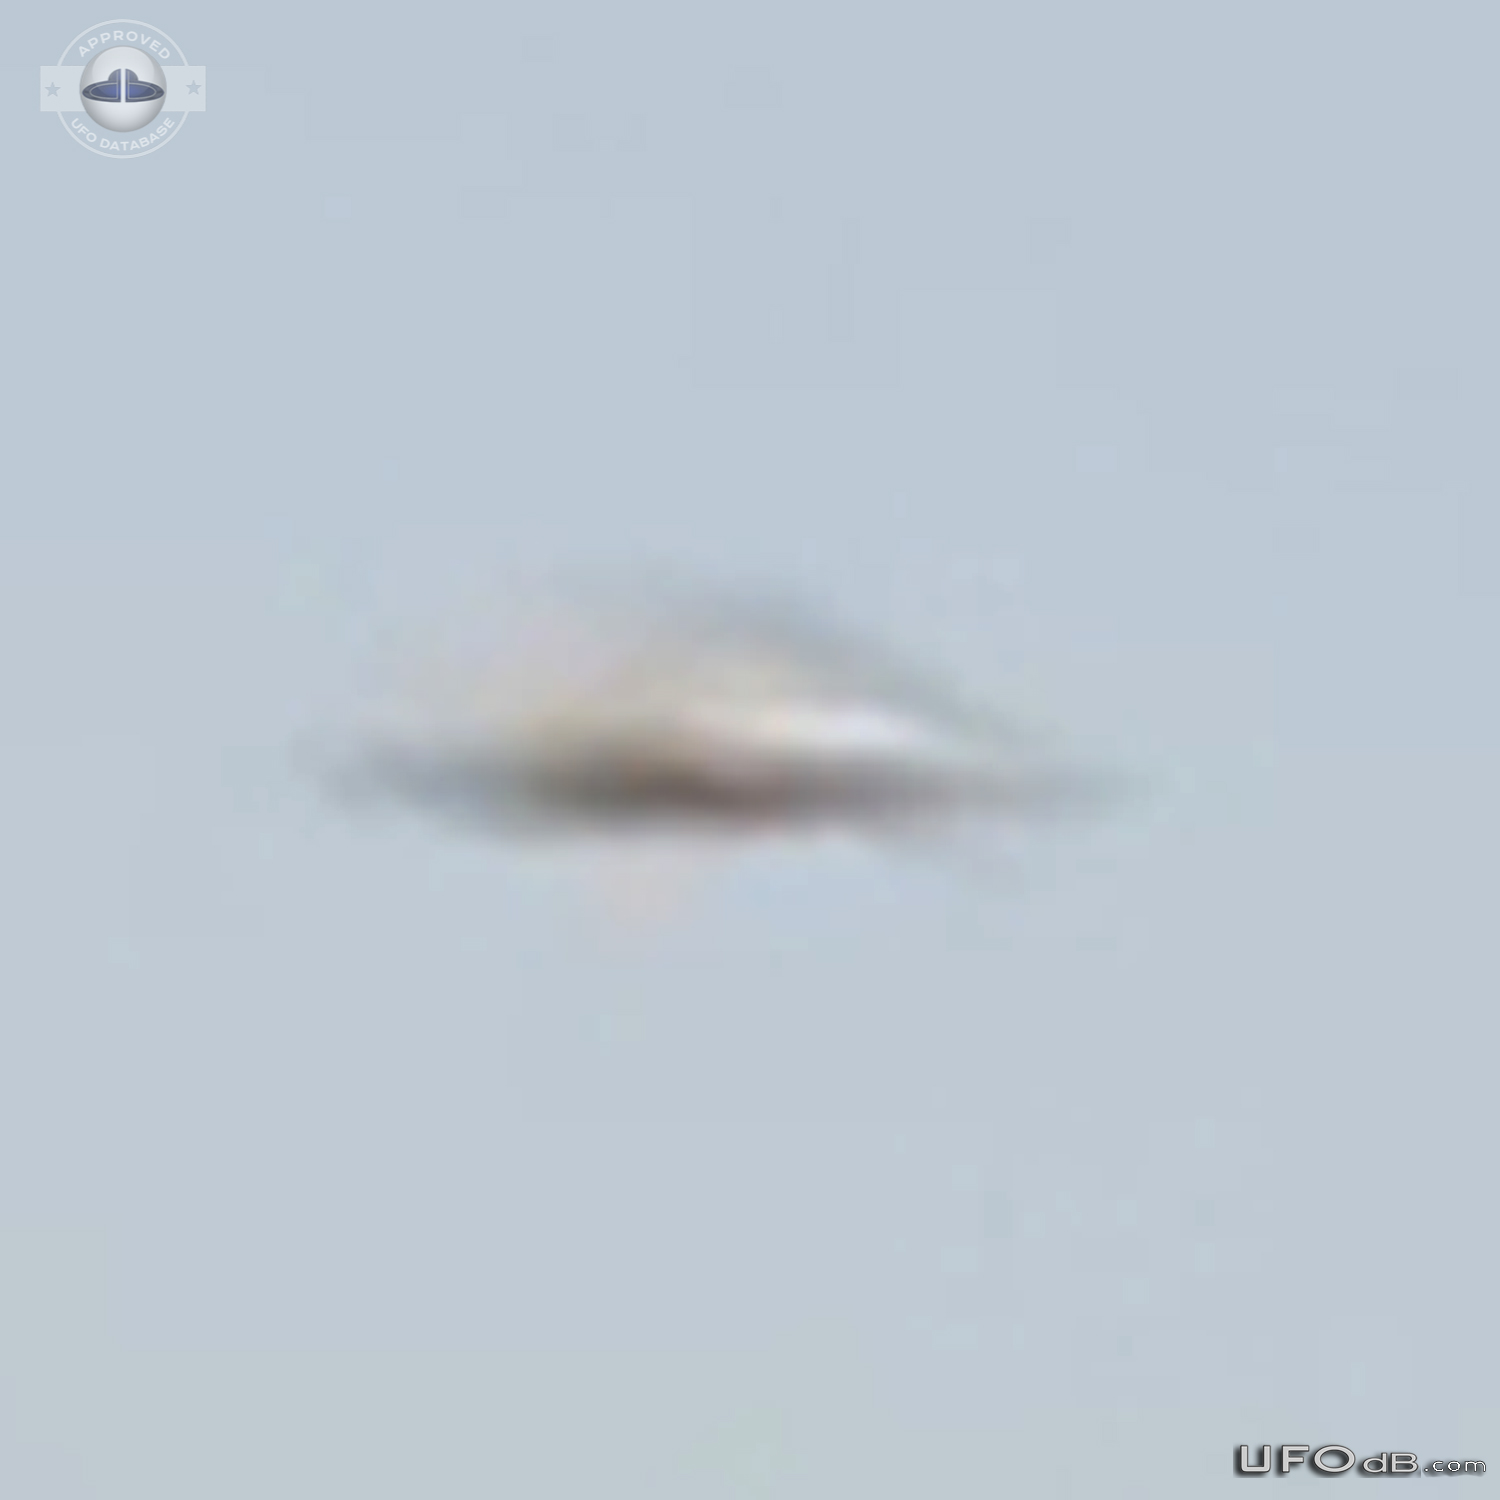 Triangular UFO passed over Warrior on a horse statue in Skopje Macedon UFO Picture #847-7